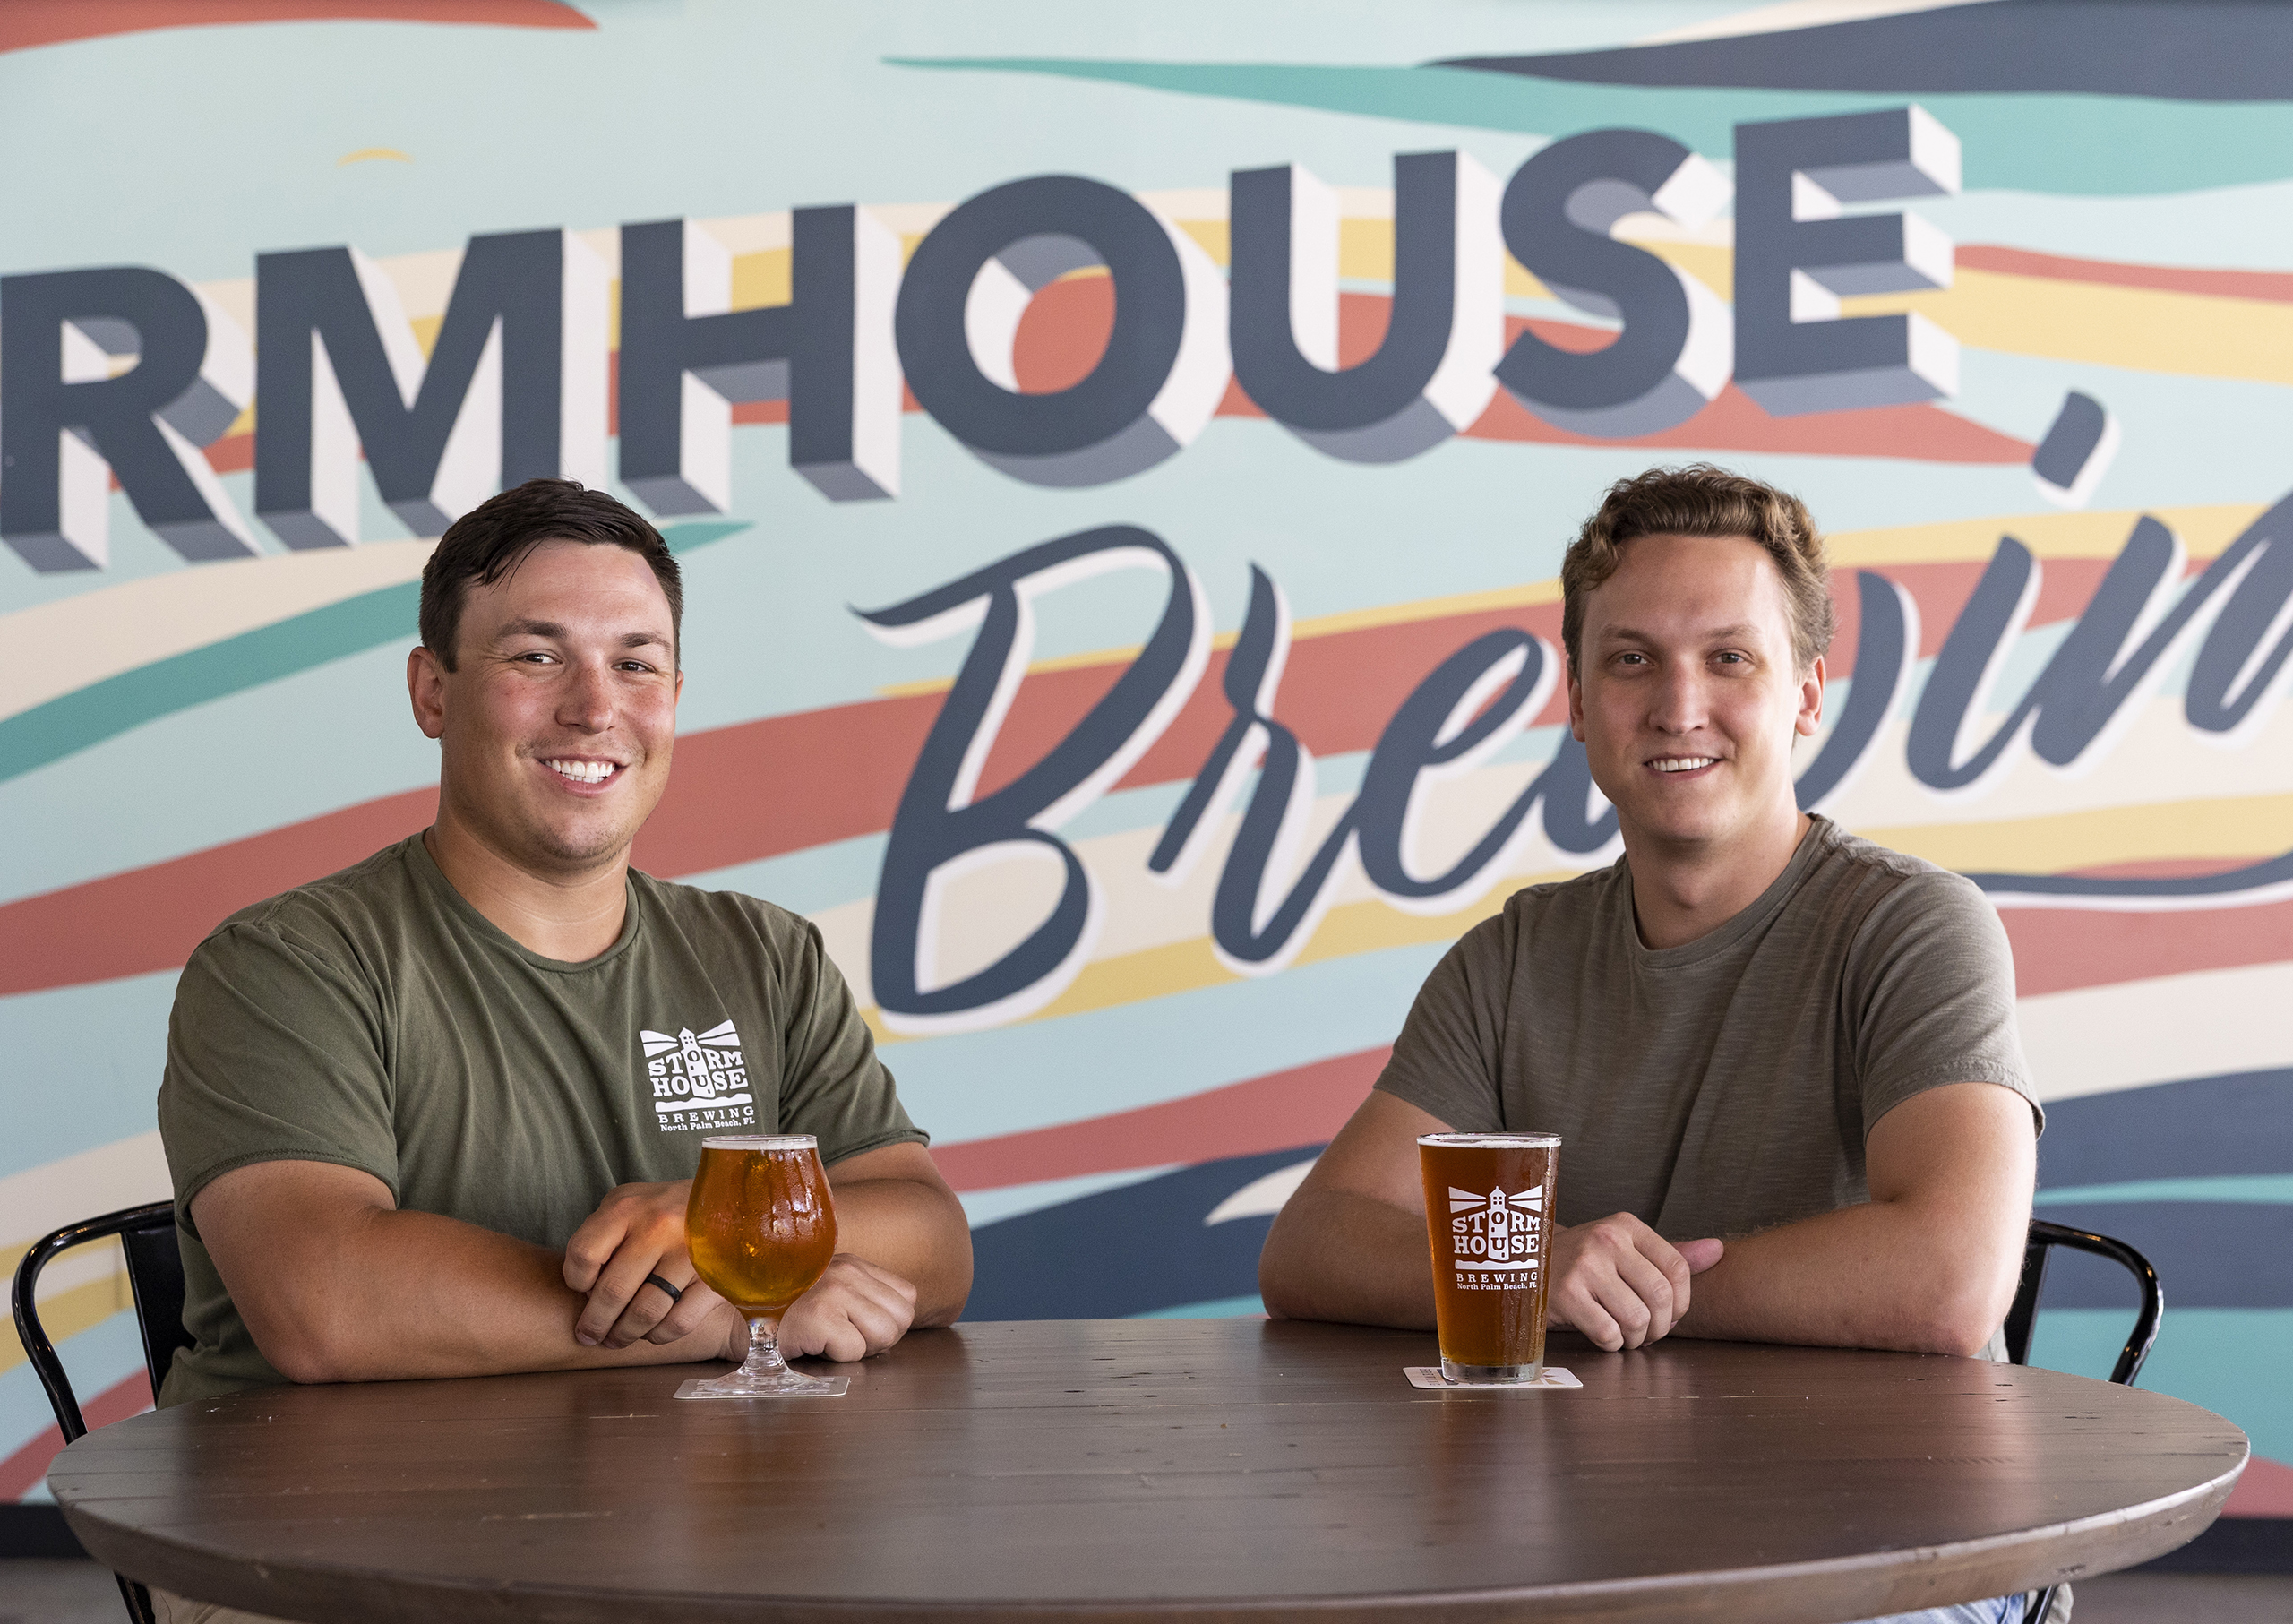 Brothers and Stormhouse Brewing owners Josh and Christian Brinzo pictured in front of a mural at their brewery in North Palm Beach, FL.